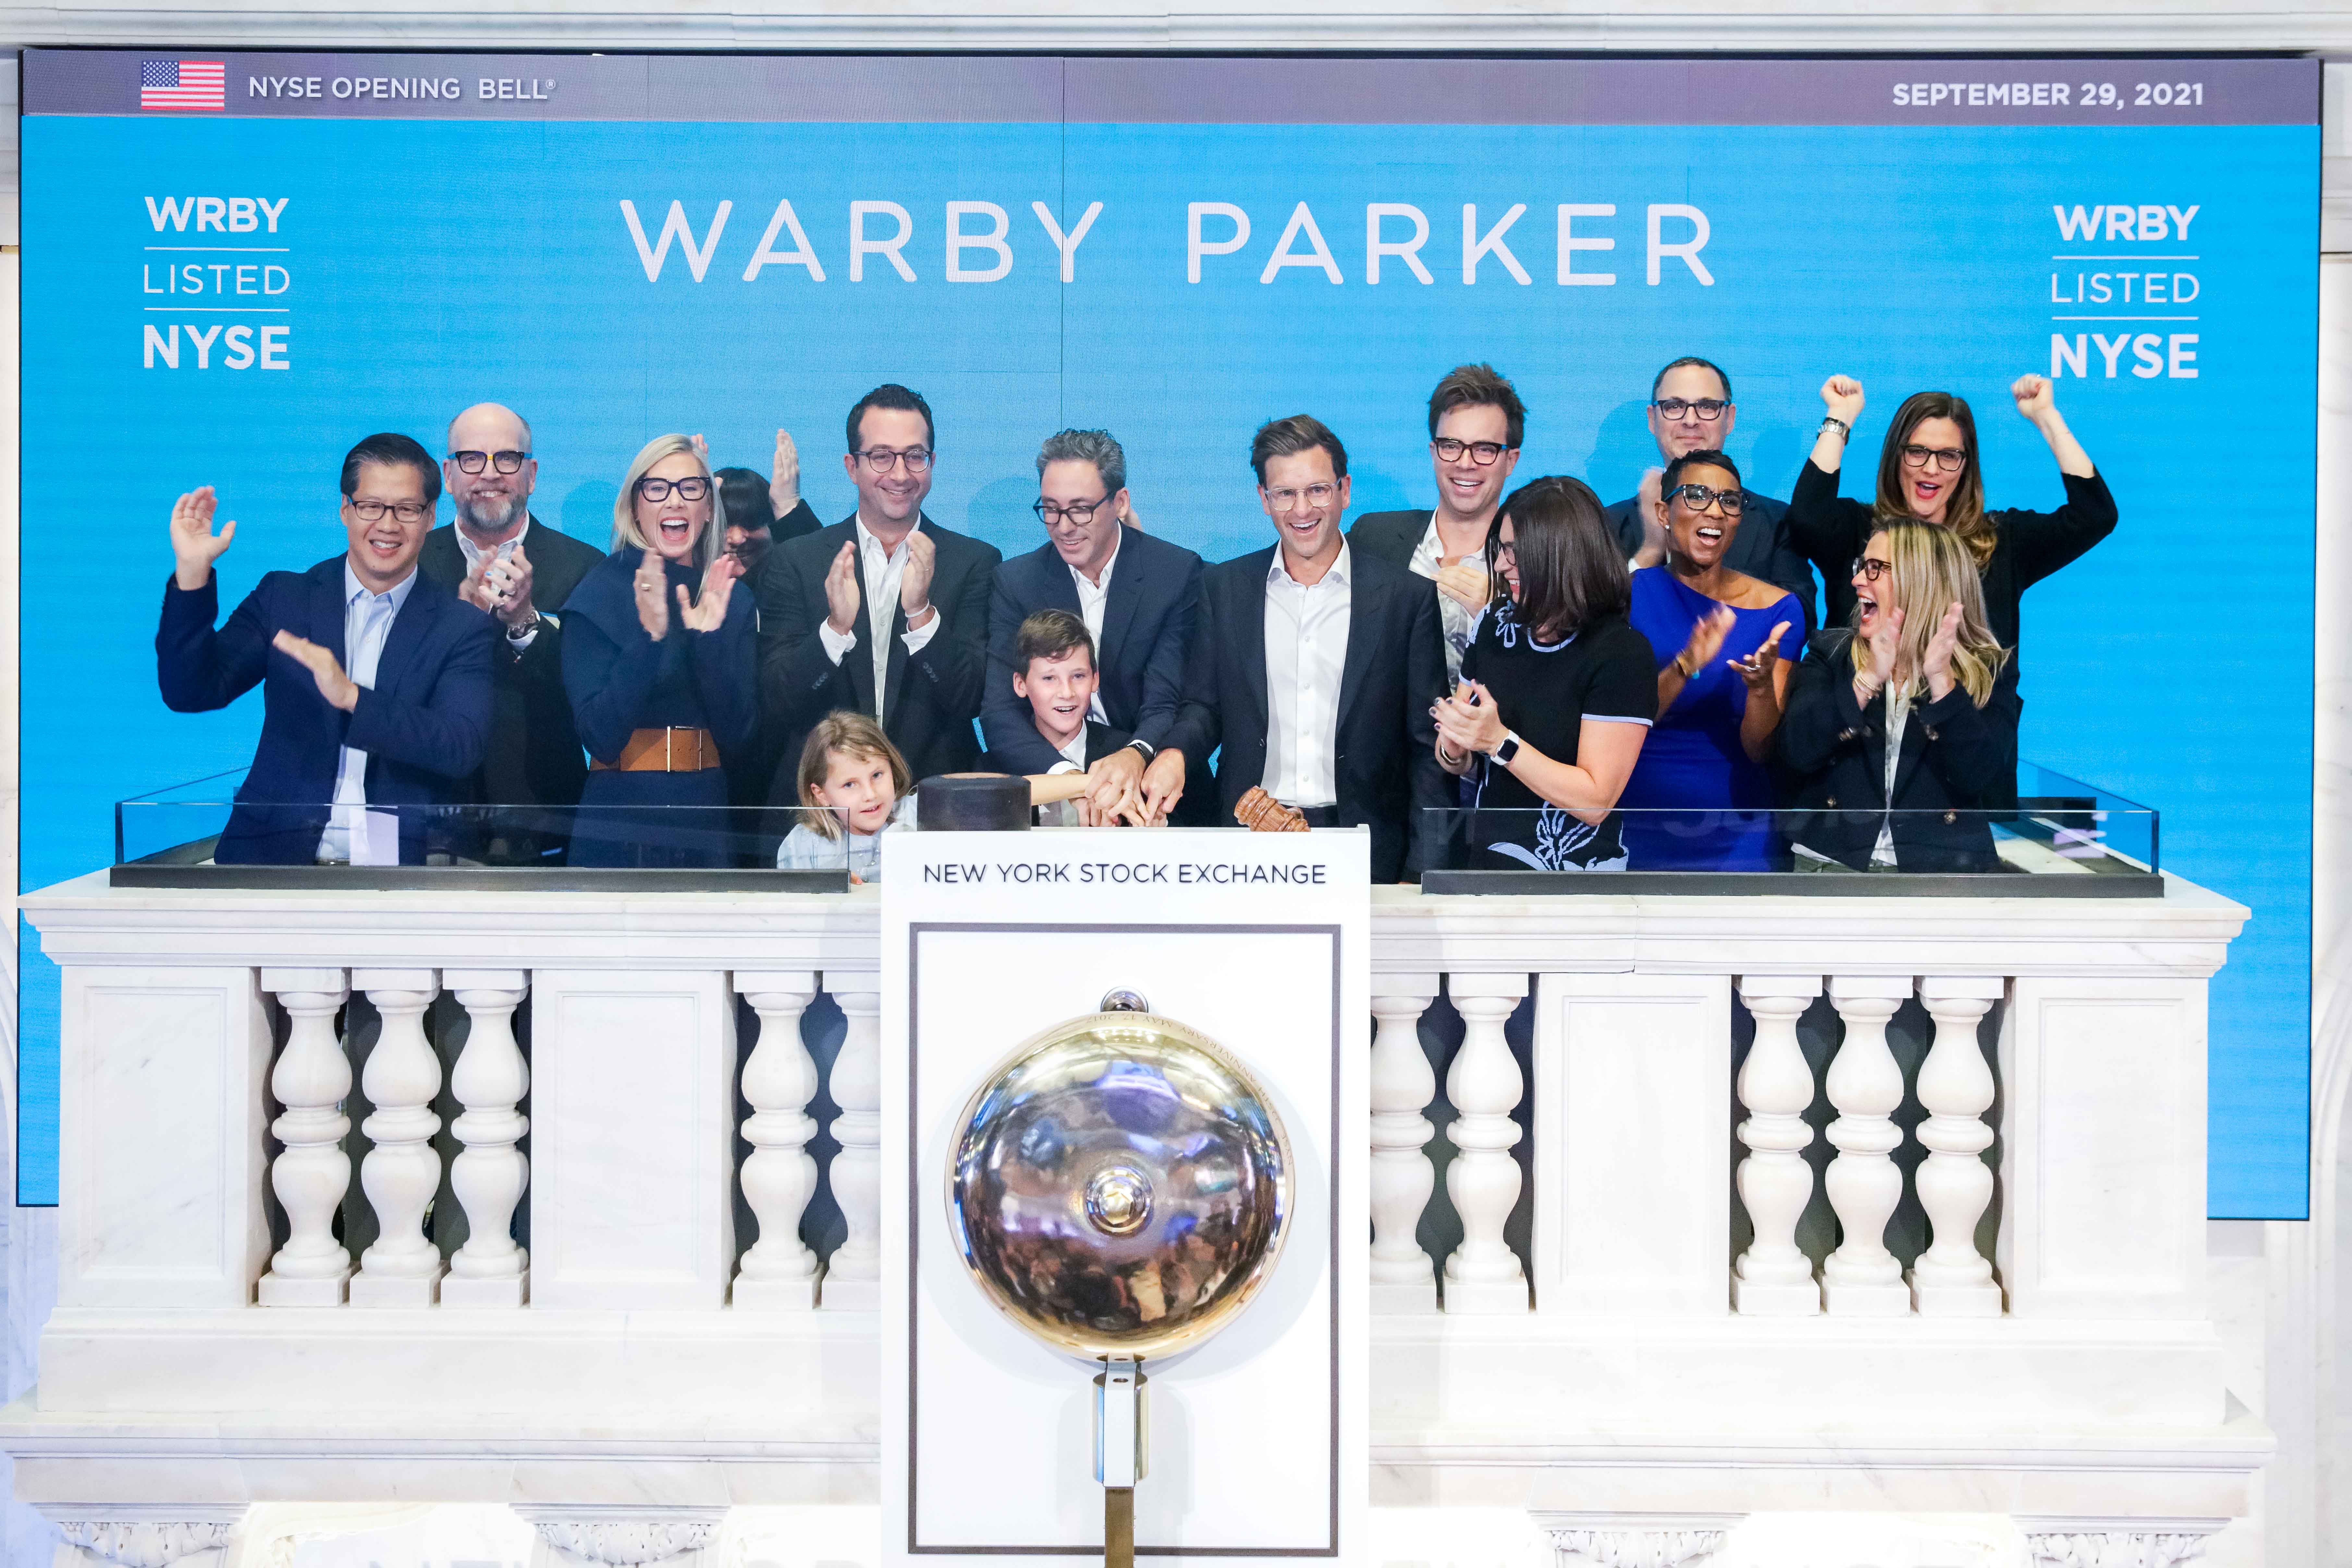 The Warby Parker team on the podium ringing the NYSE opening bell.